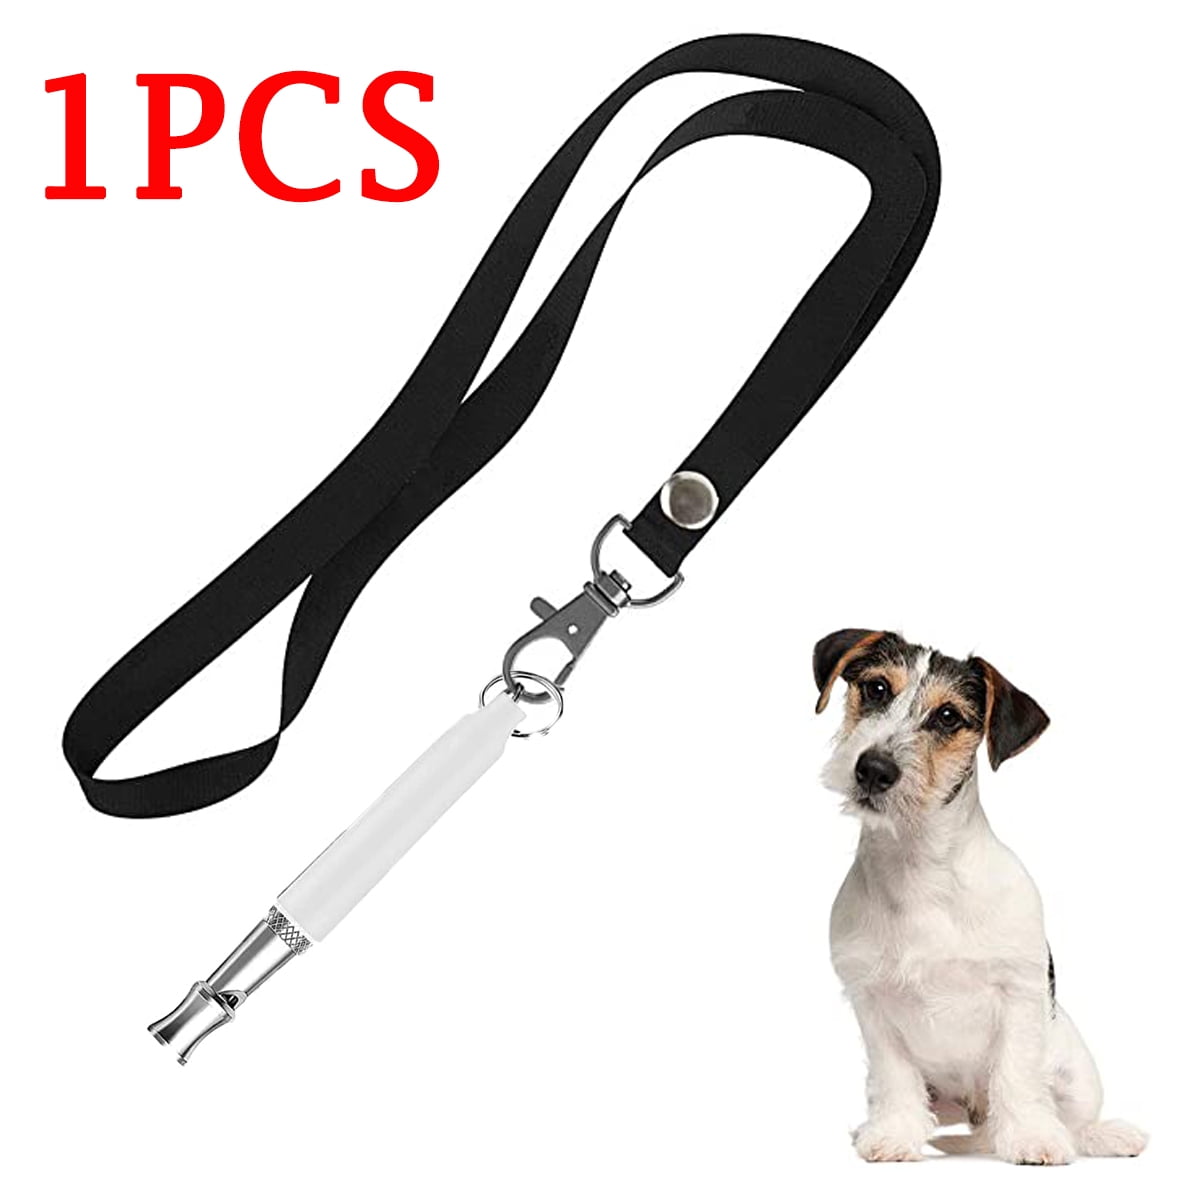 Adjustable Pitch Ultrasonic Training Tool Silent Bark Control for Dogs with Free Lanyard Strap ZDCDEALS Professional Ultrasonic Dog Training Whistle to Stop Barking